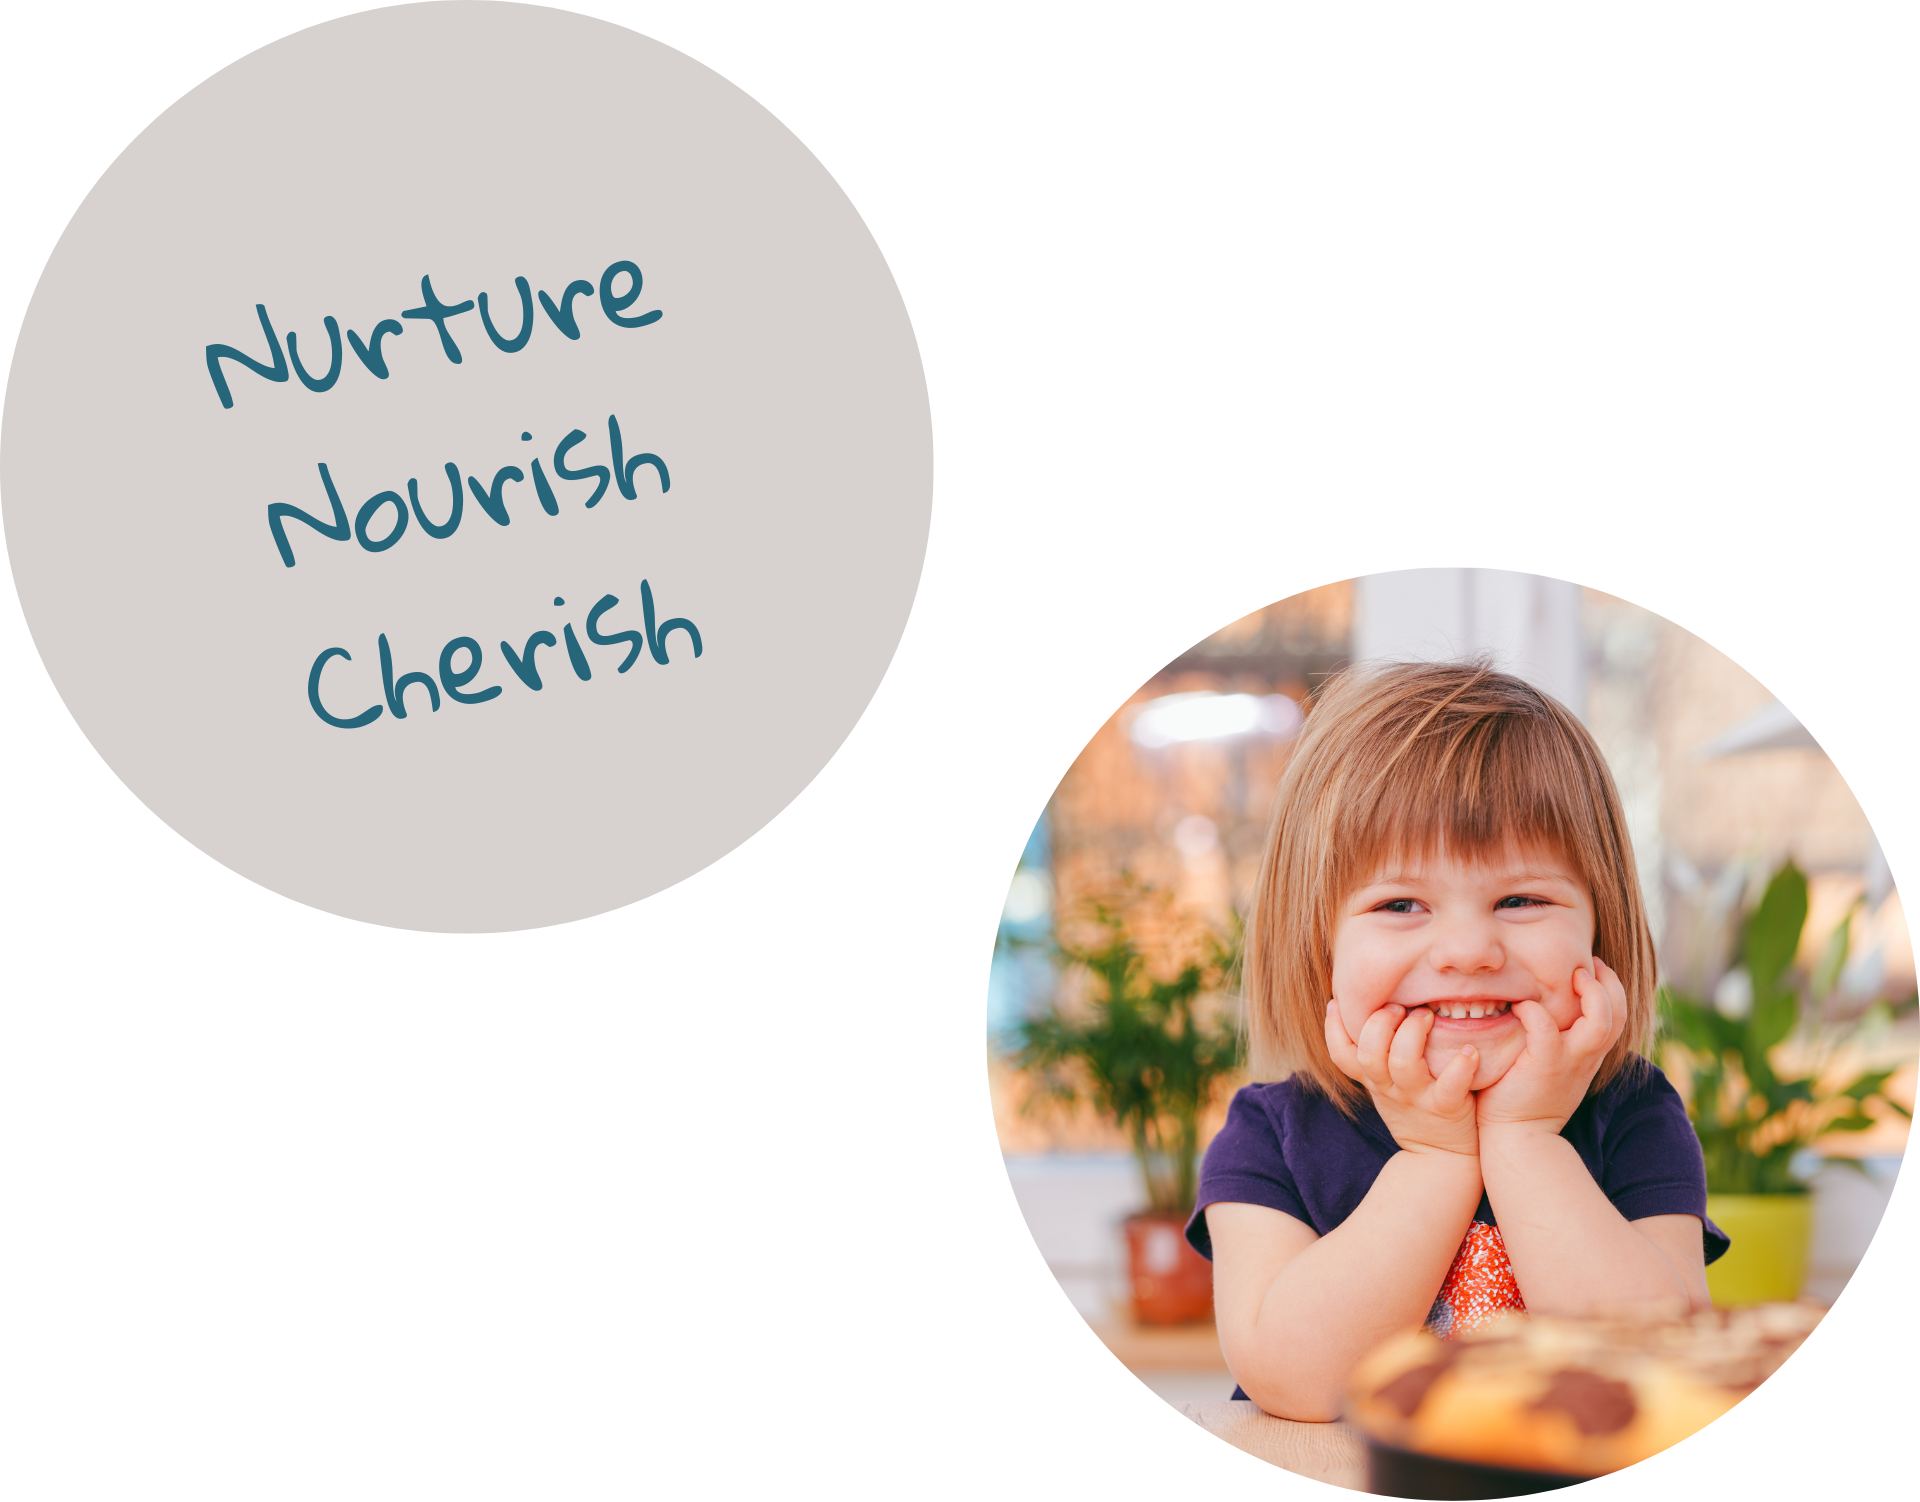 A circle photo of a young smiling girl with blurred food in the foreground. Next to her, another circle image names the current website section "Nurture, nourish, cherish".